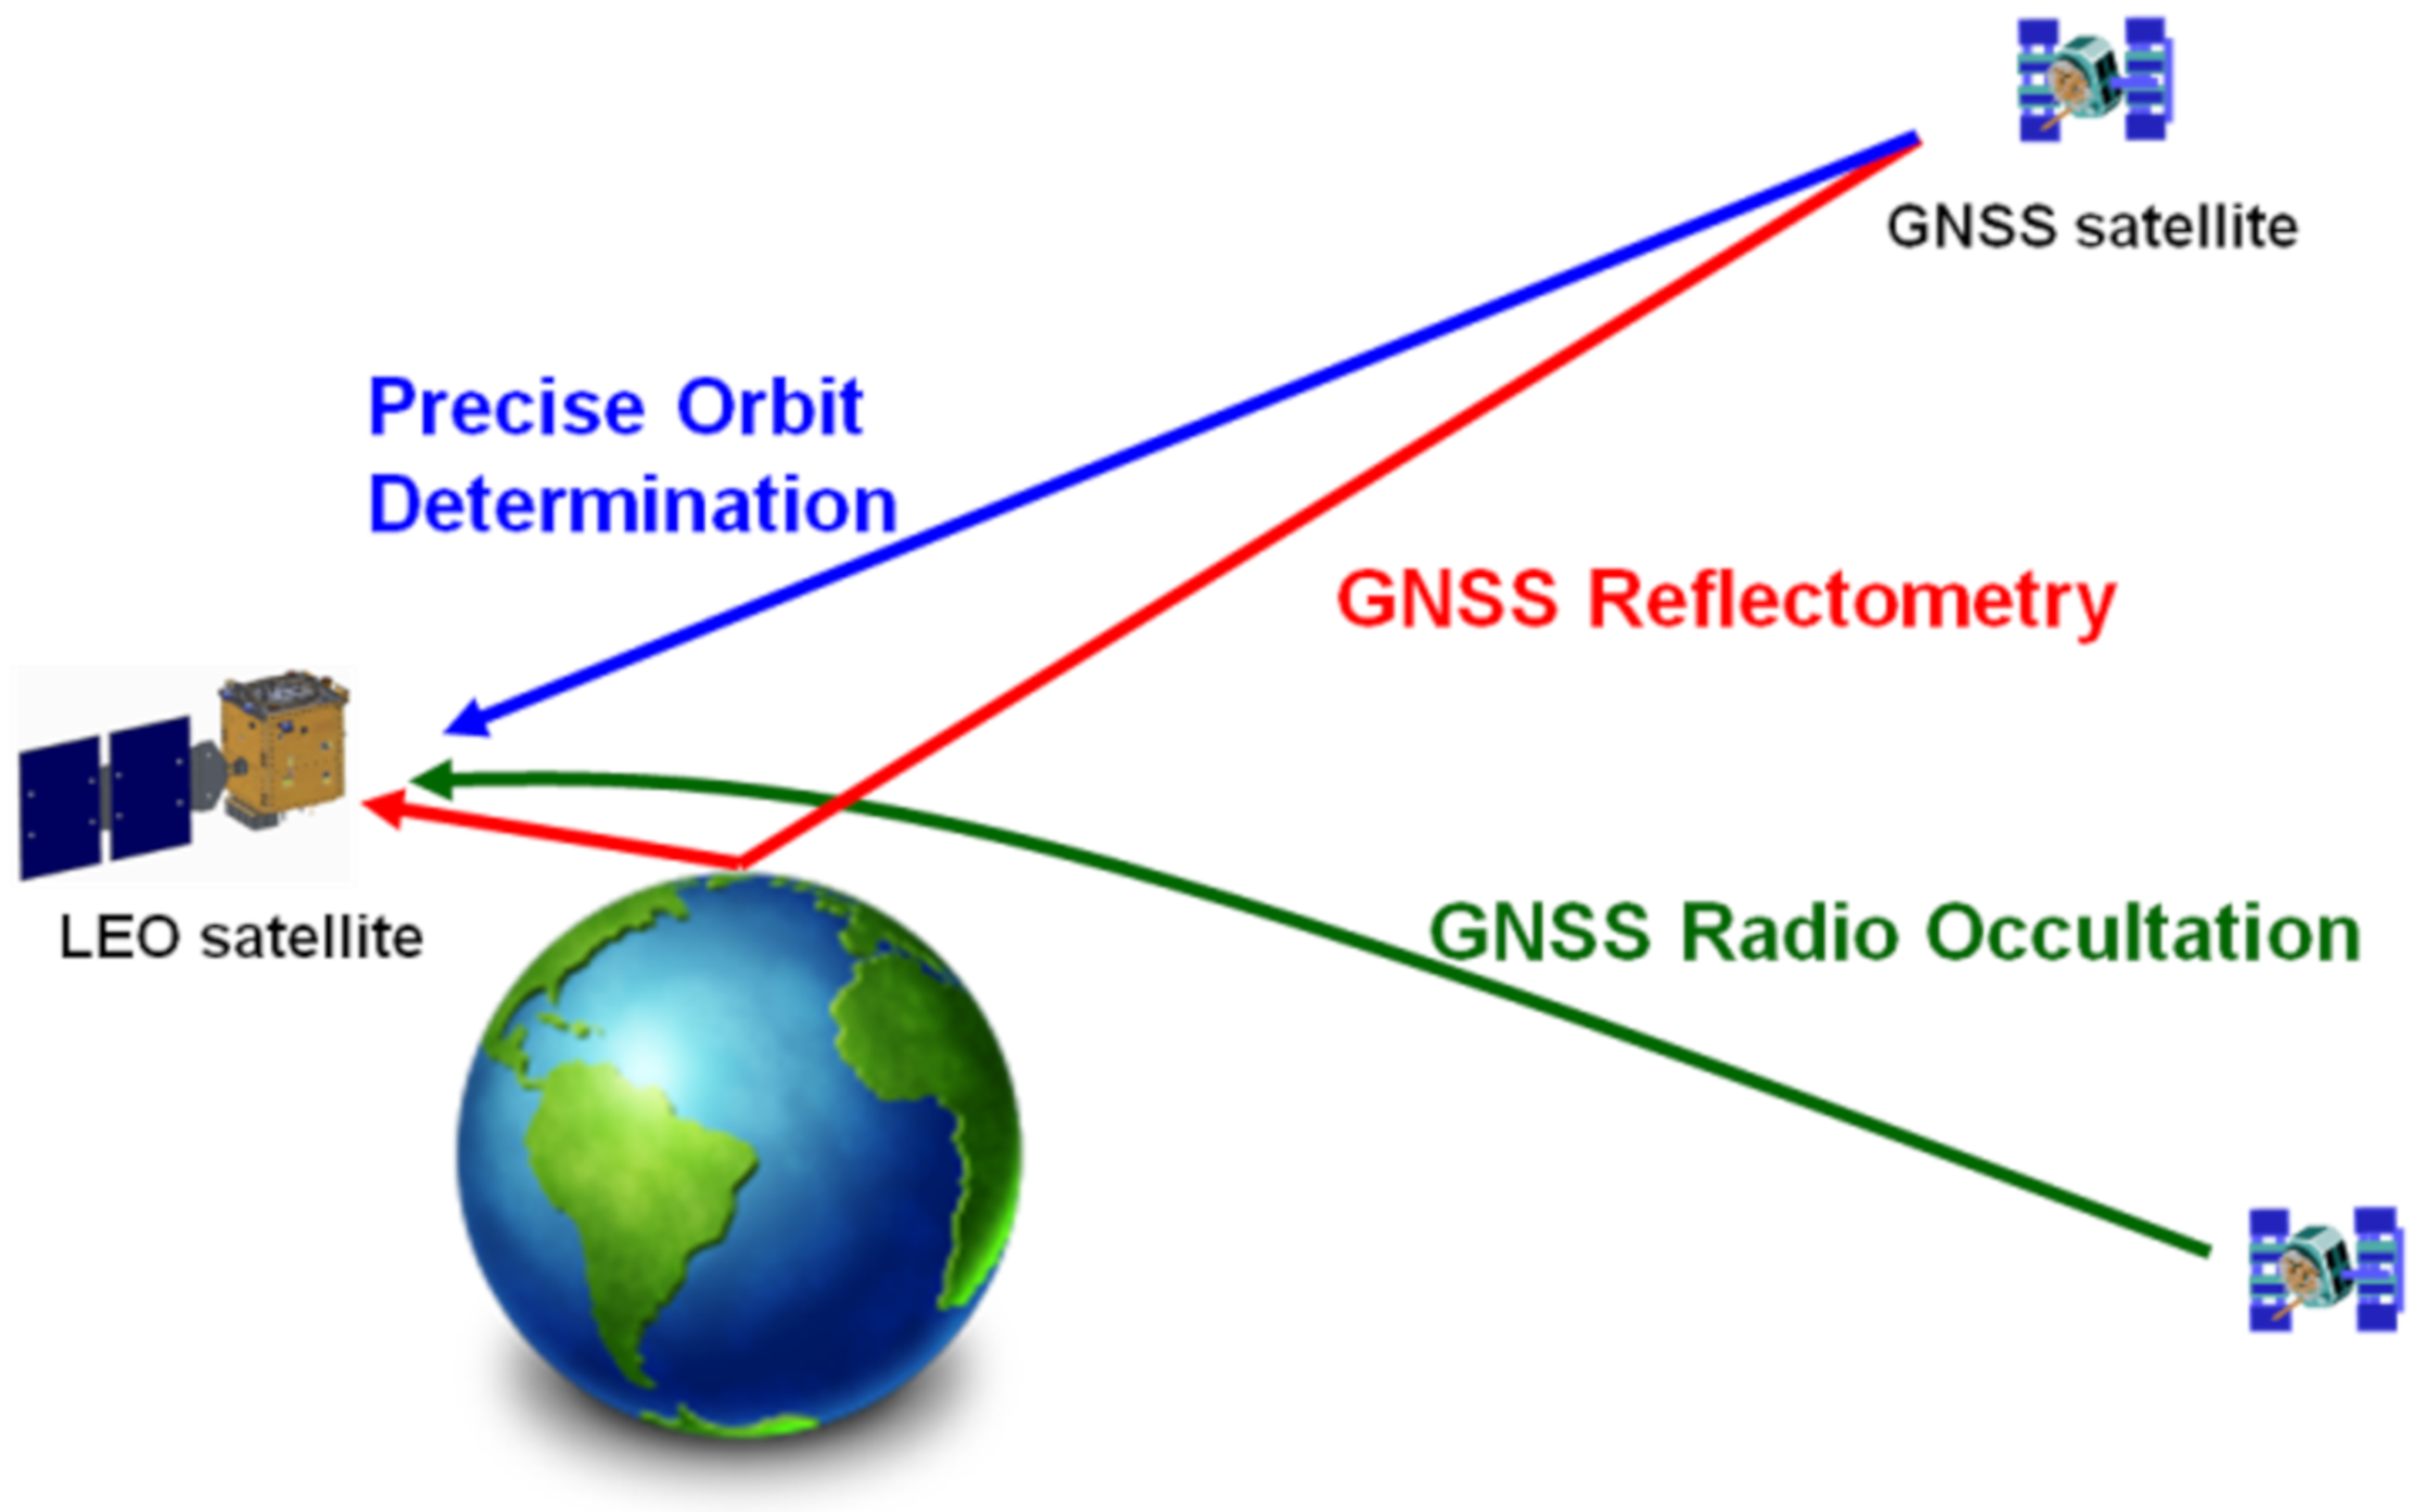 Remote Sensing | Free Full-Text | From GPS Receiver to GNSS Reflectometry Payload Development for the Triton Satellite Mission | HTML